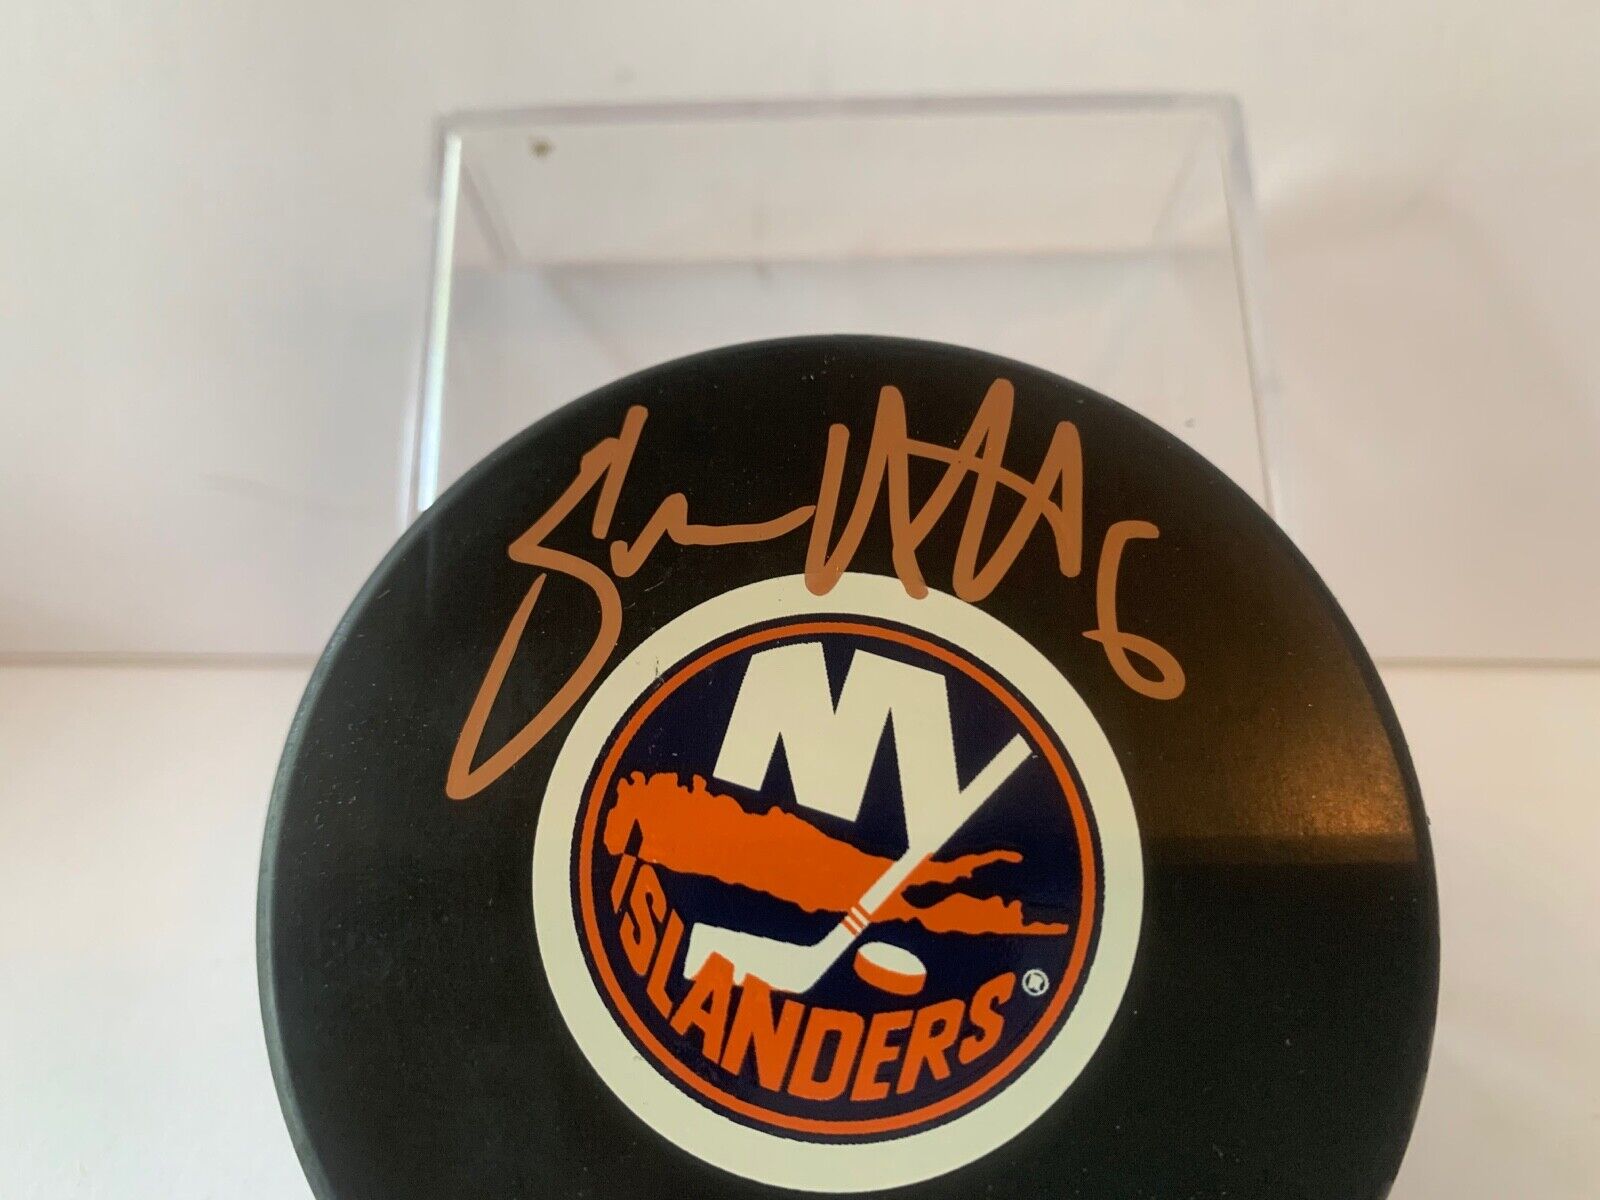 Sean Hill Autographed Official NHL Hockey Puck with New York Islanders Logo